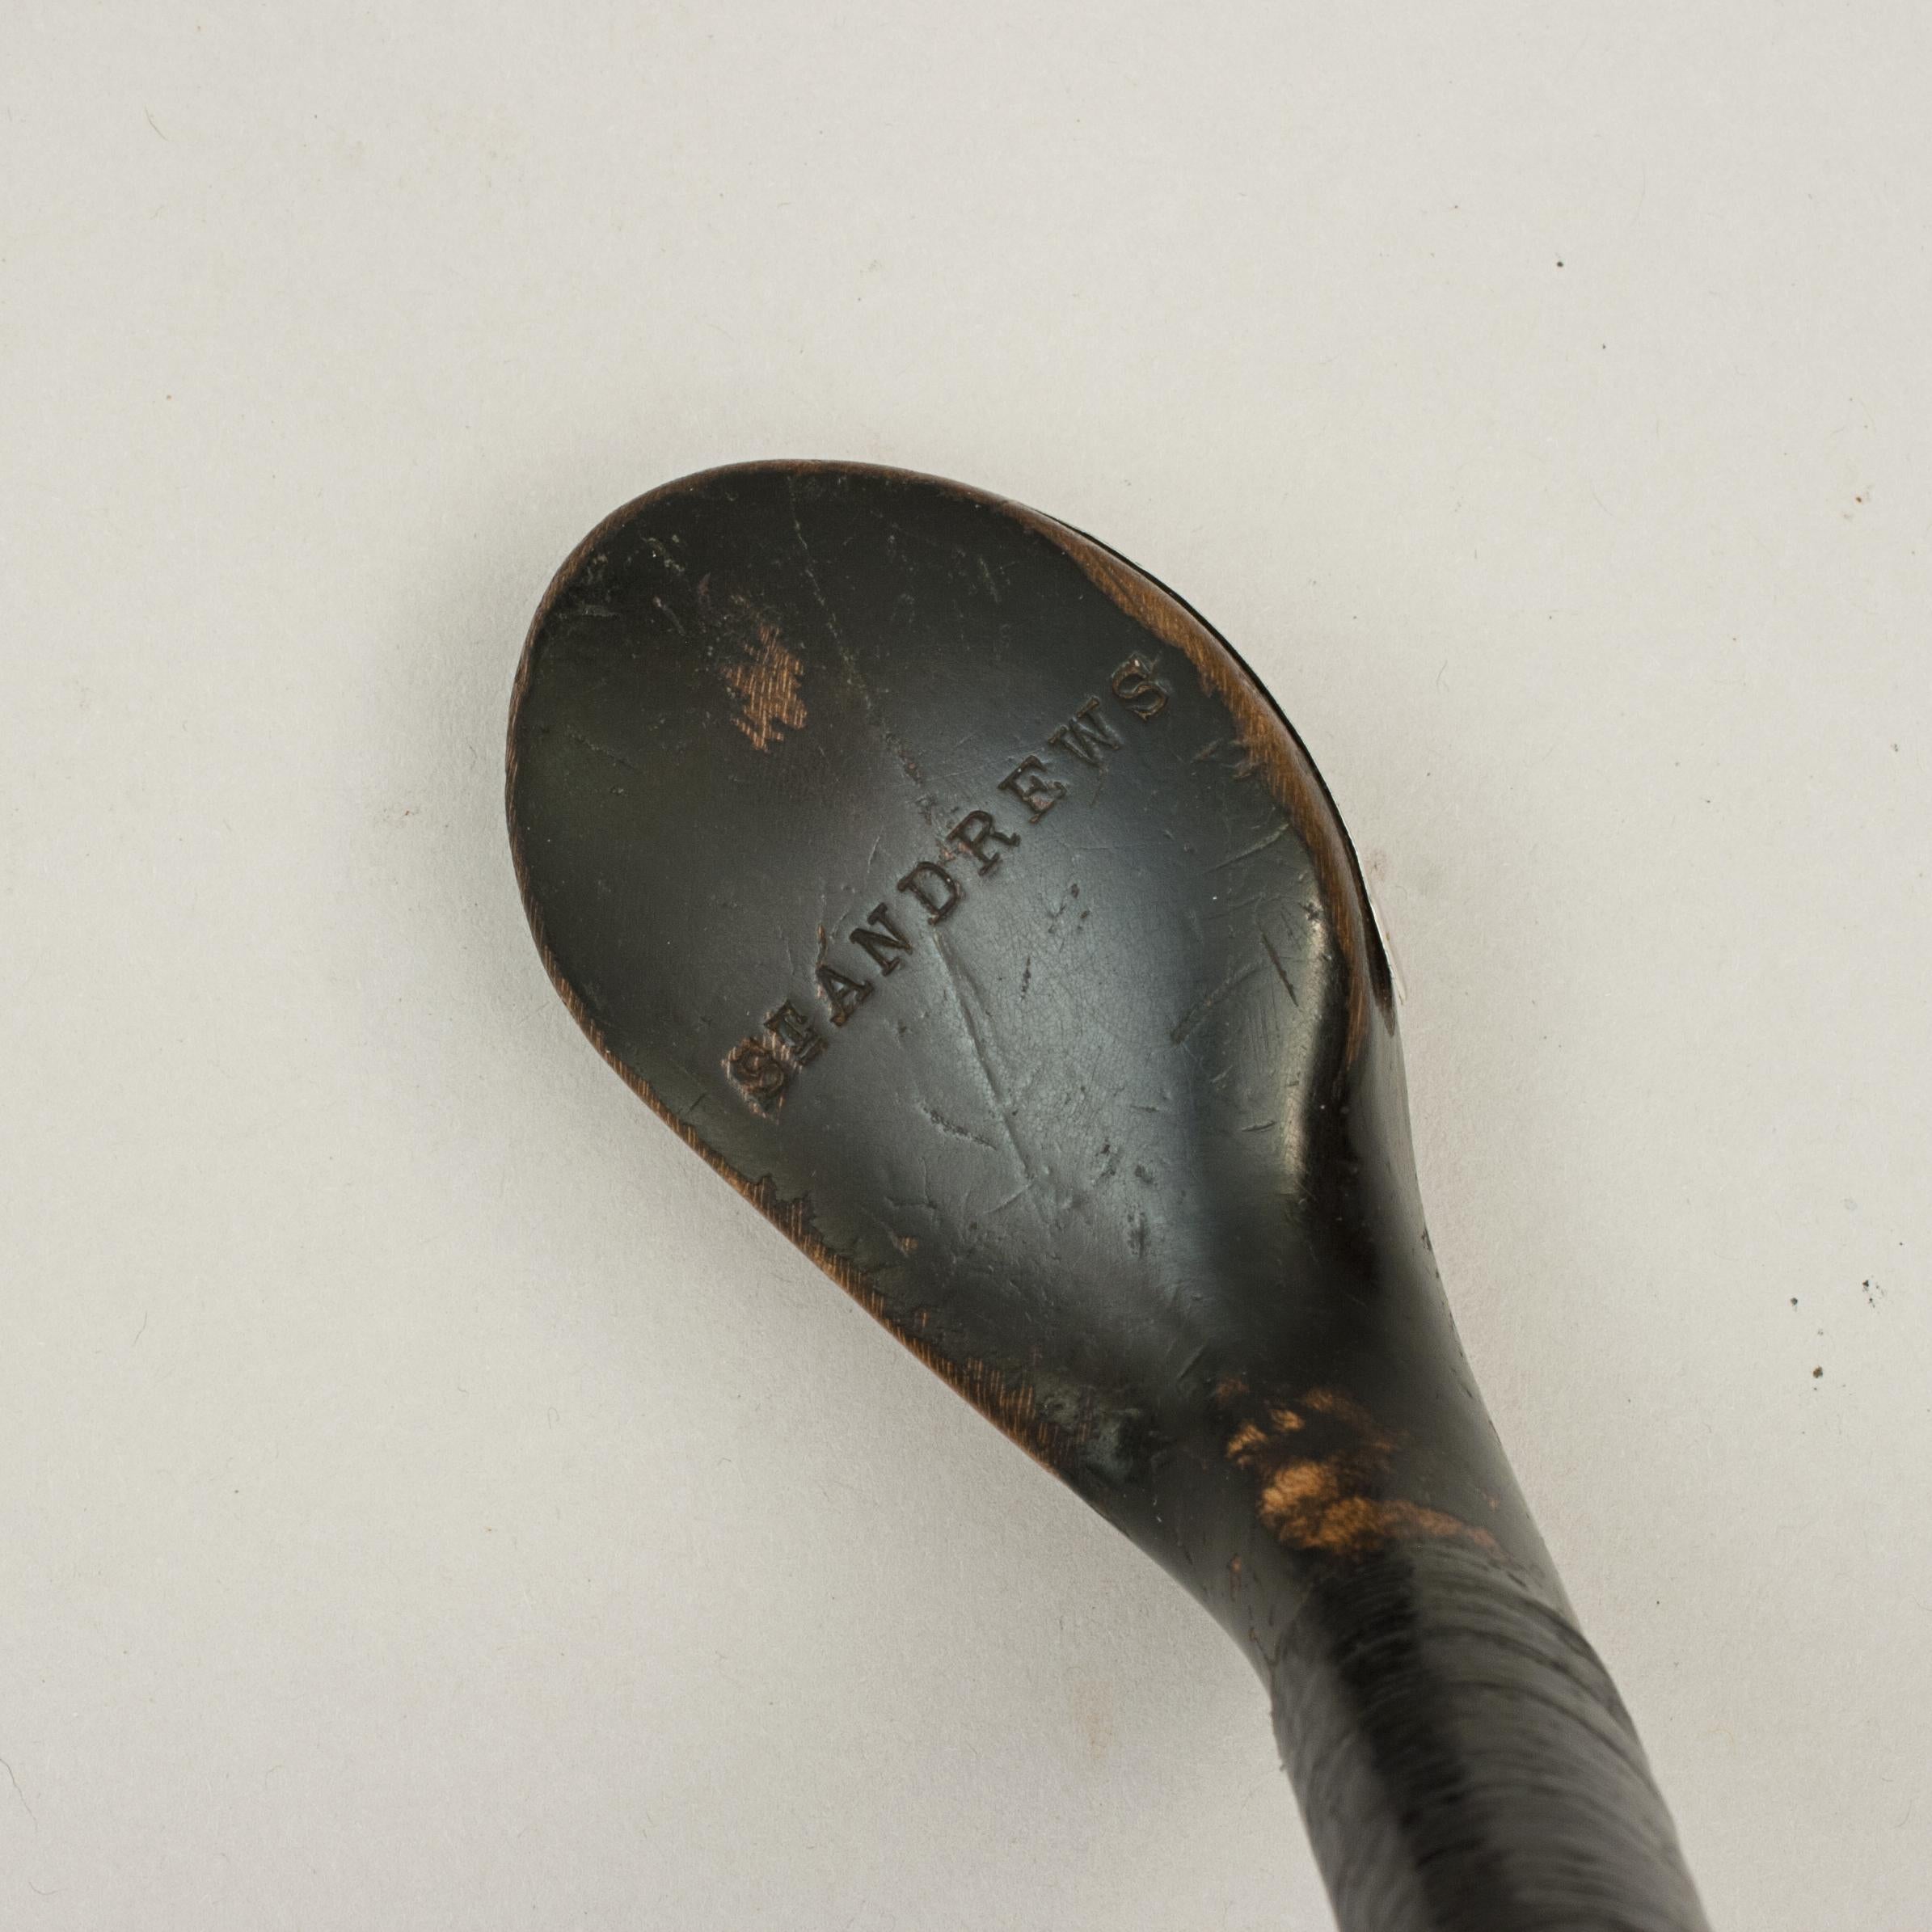 St Andrews golf walking cane, Sunday Club.
A desirable walking cane with the handle in the shape of an early scare headed golf club head. The gentleman's walking stick has a wooden club head with a traditional horn slip along the leading edge of